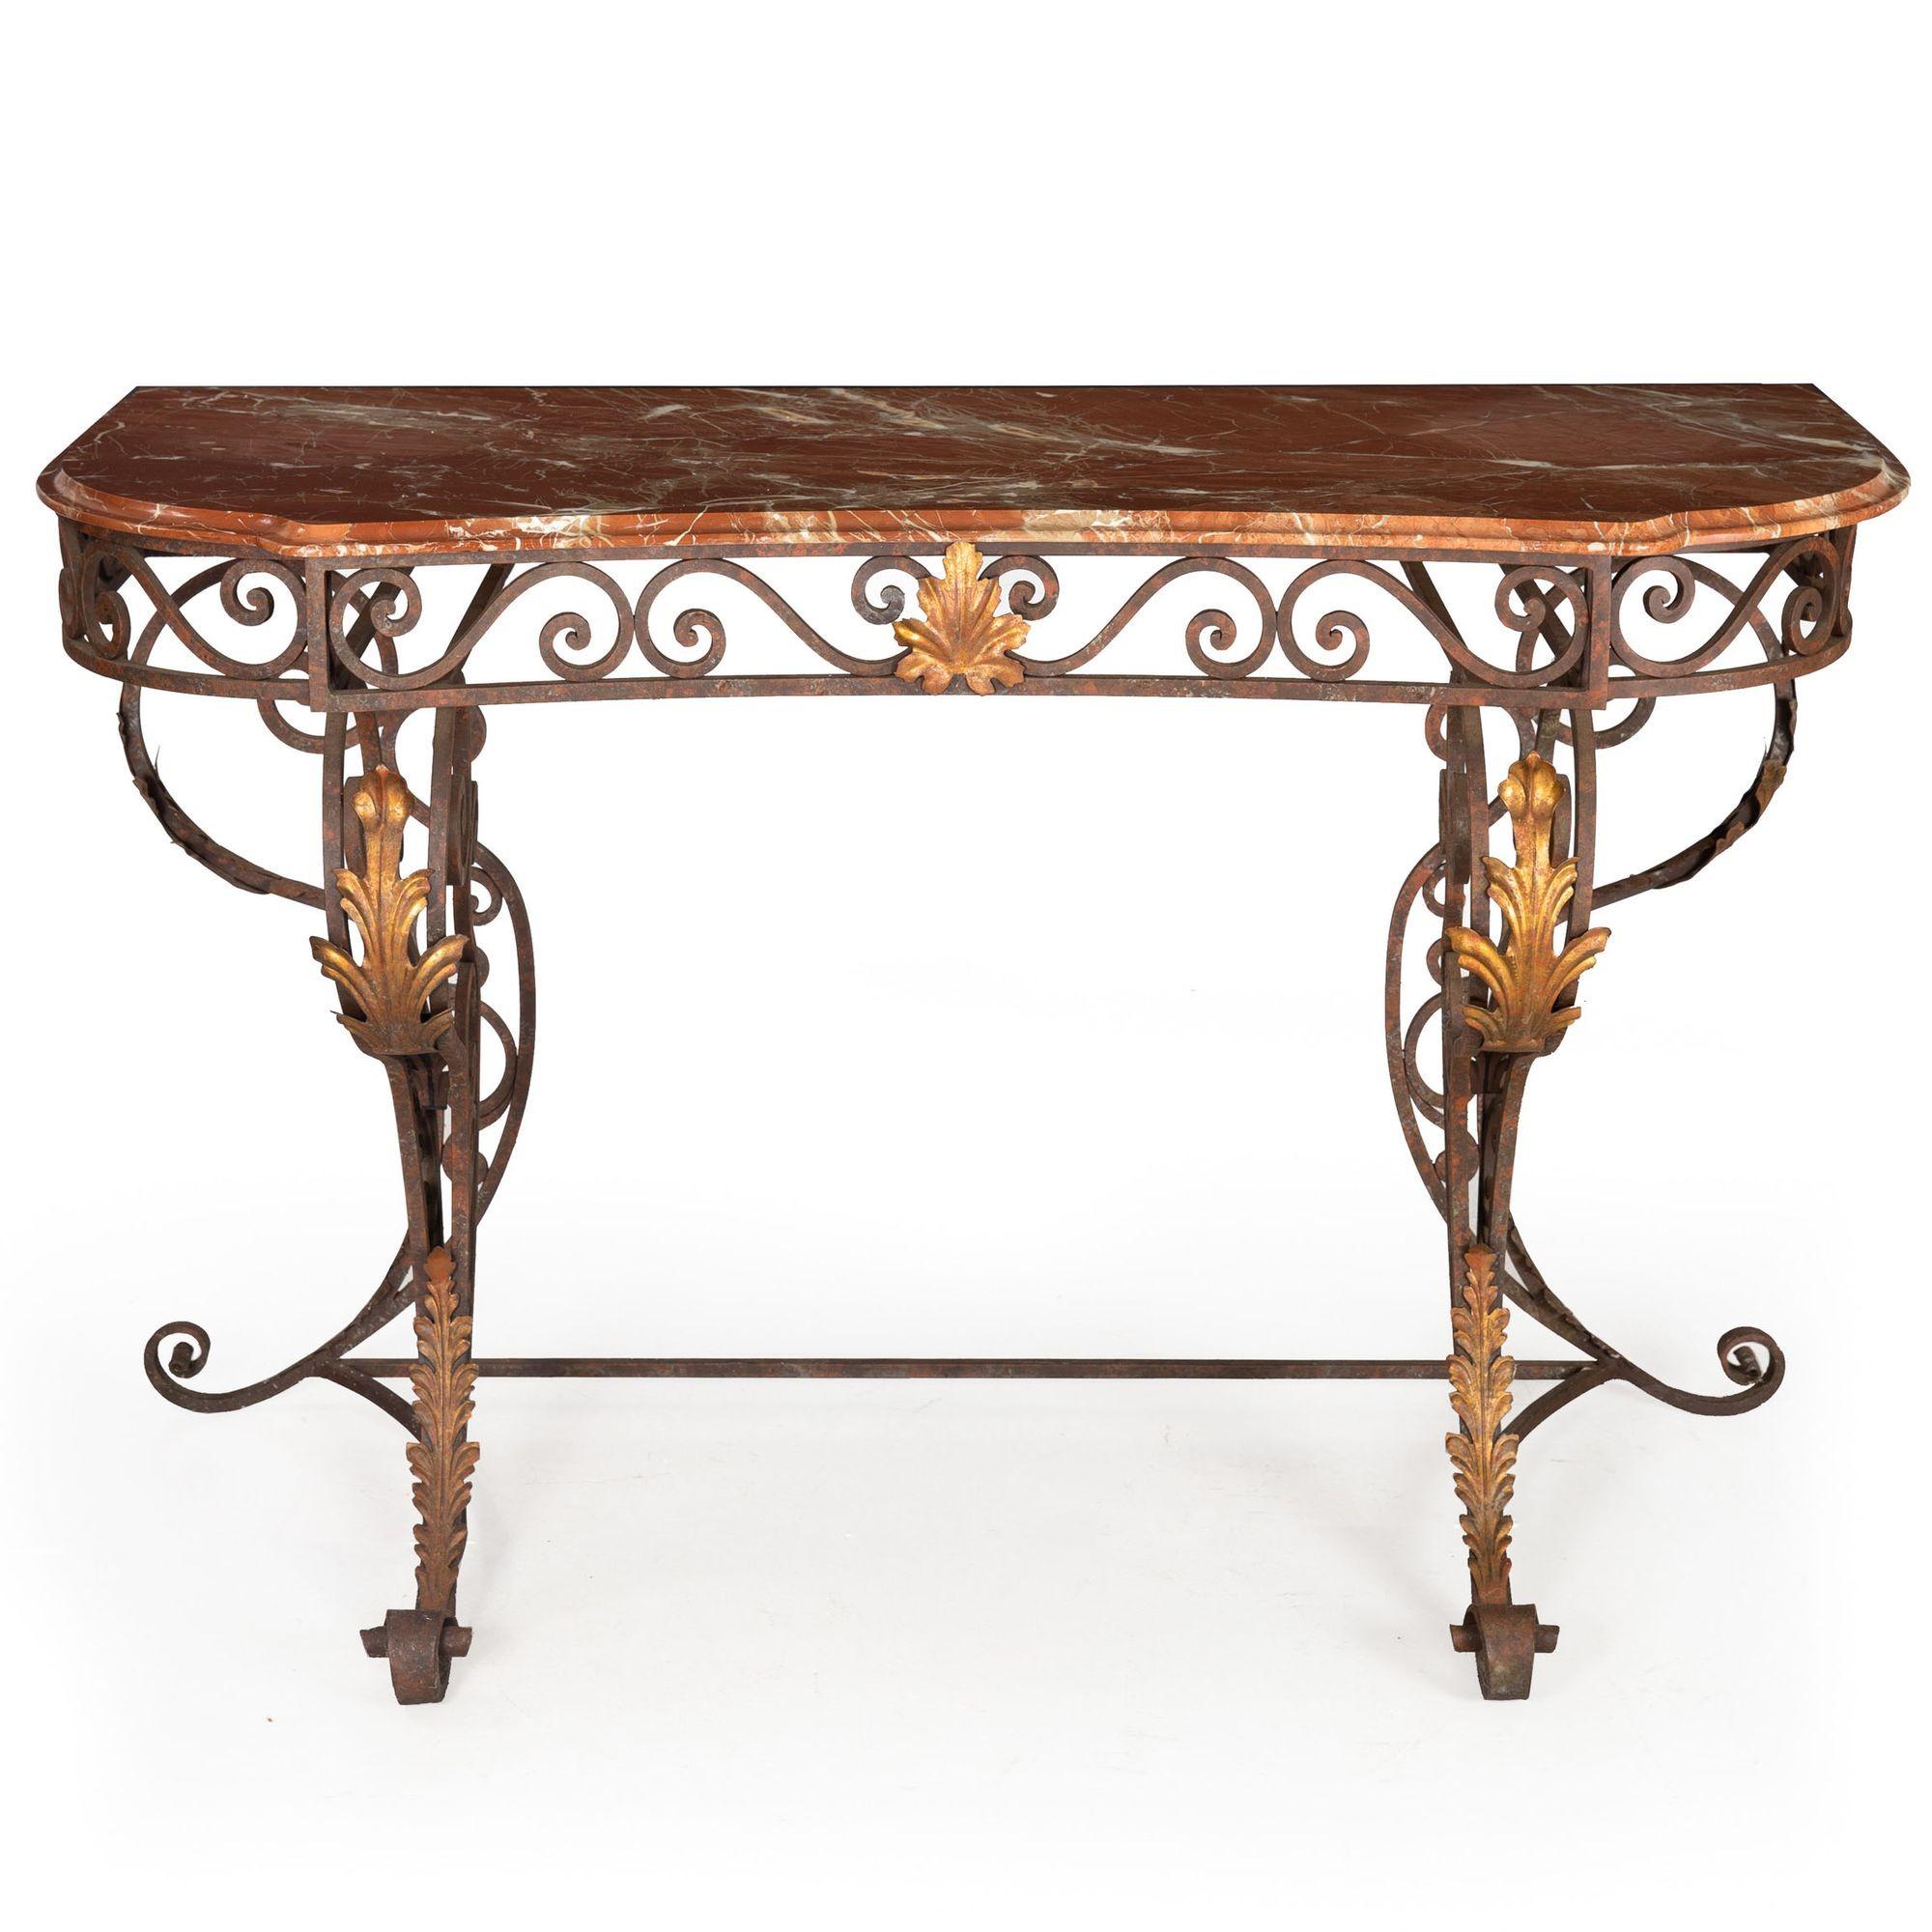 GILT AND PATINATED WROUGHT IRON CONSOLE WITH ROUGE MARBLE TOP
20th Century
Item # 304LNP24P 

A nice mid-to-late 20th century wrought iron console, it features a lovely rouge marble top with wonderful veining throughout and a thumb-molded edge. The